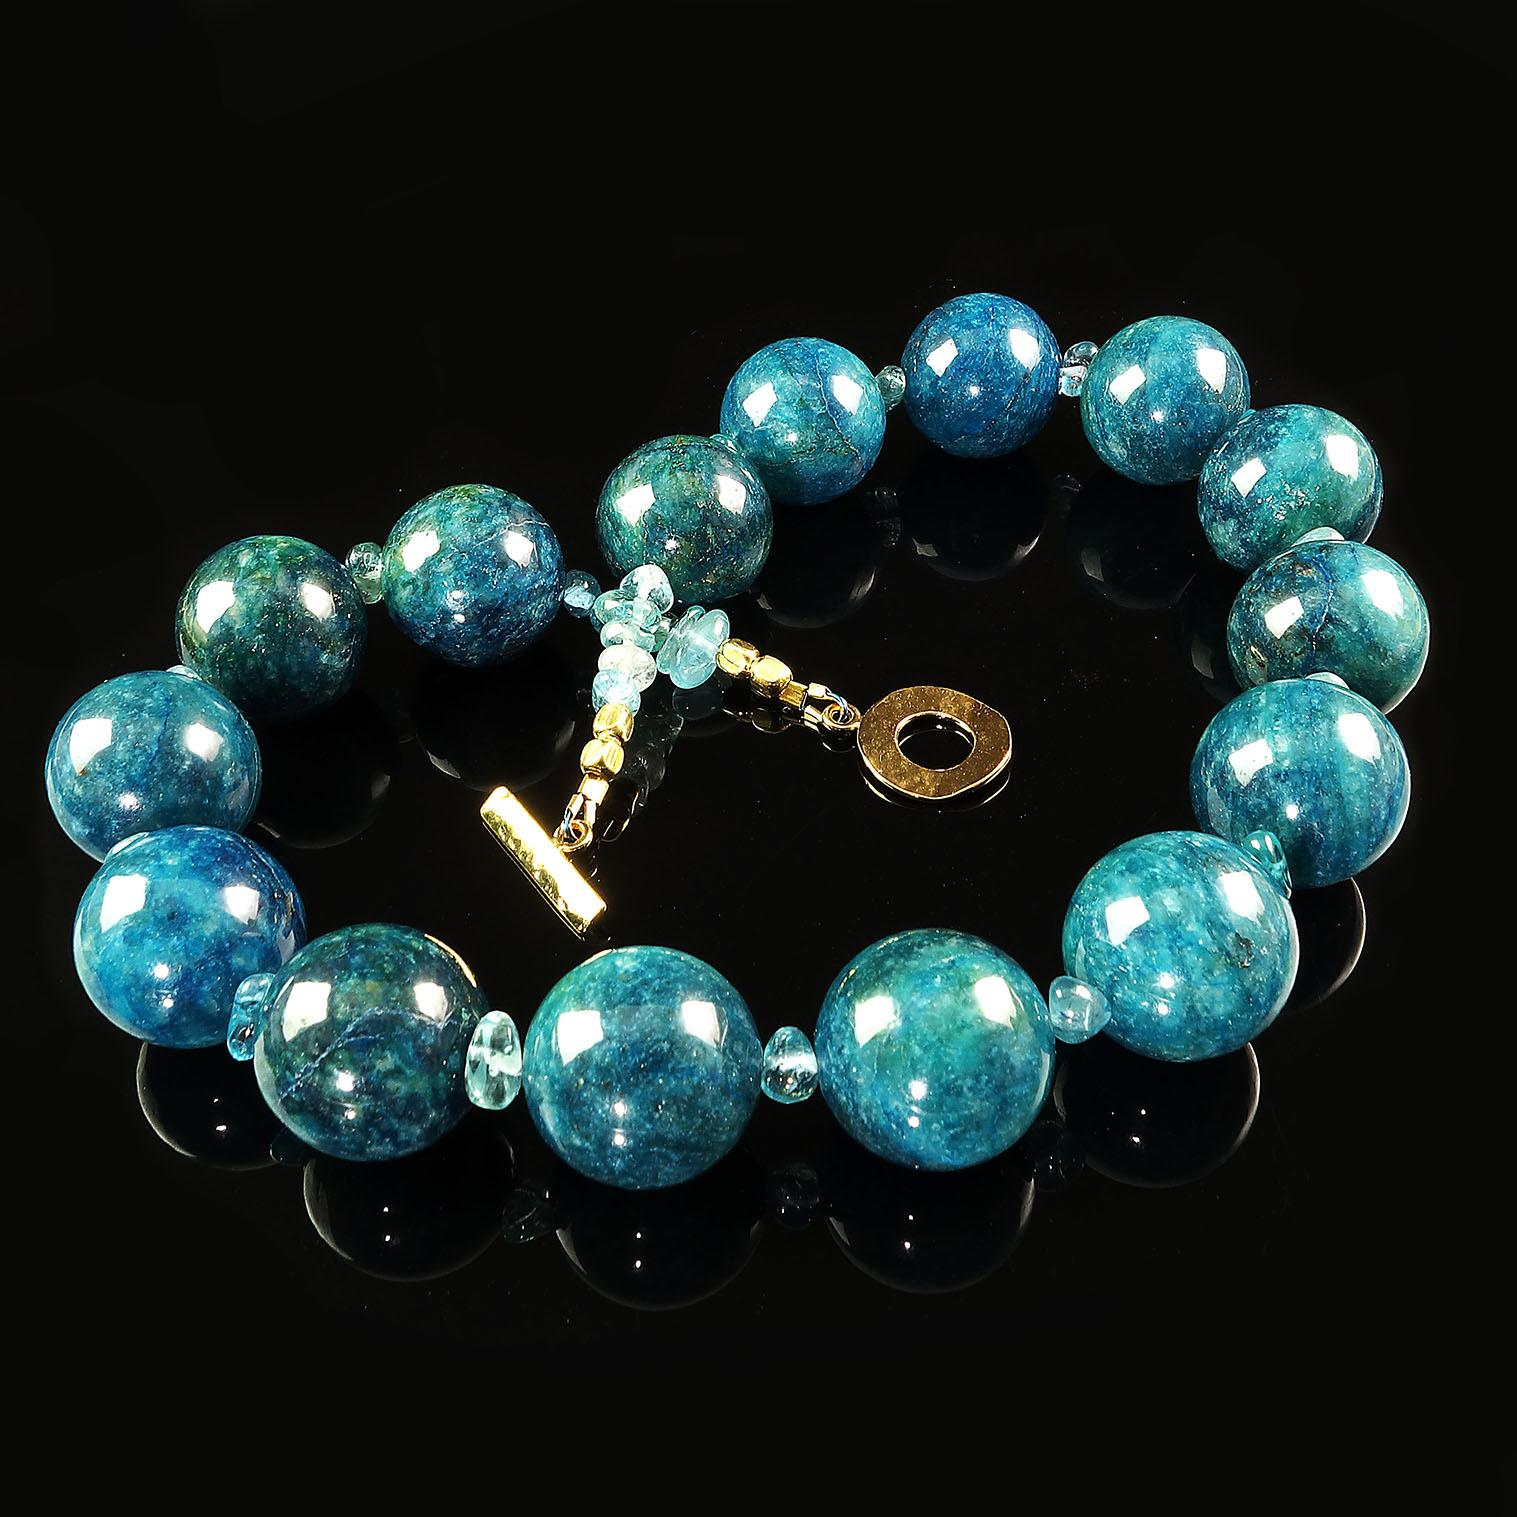 Artisan Gemjunky Statement Teal Color Apatite and Apatite Necklace